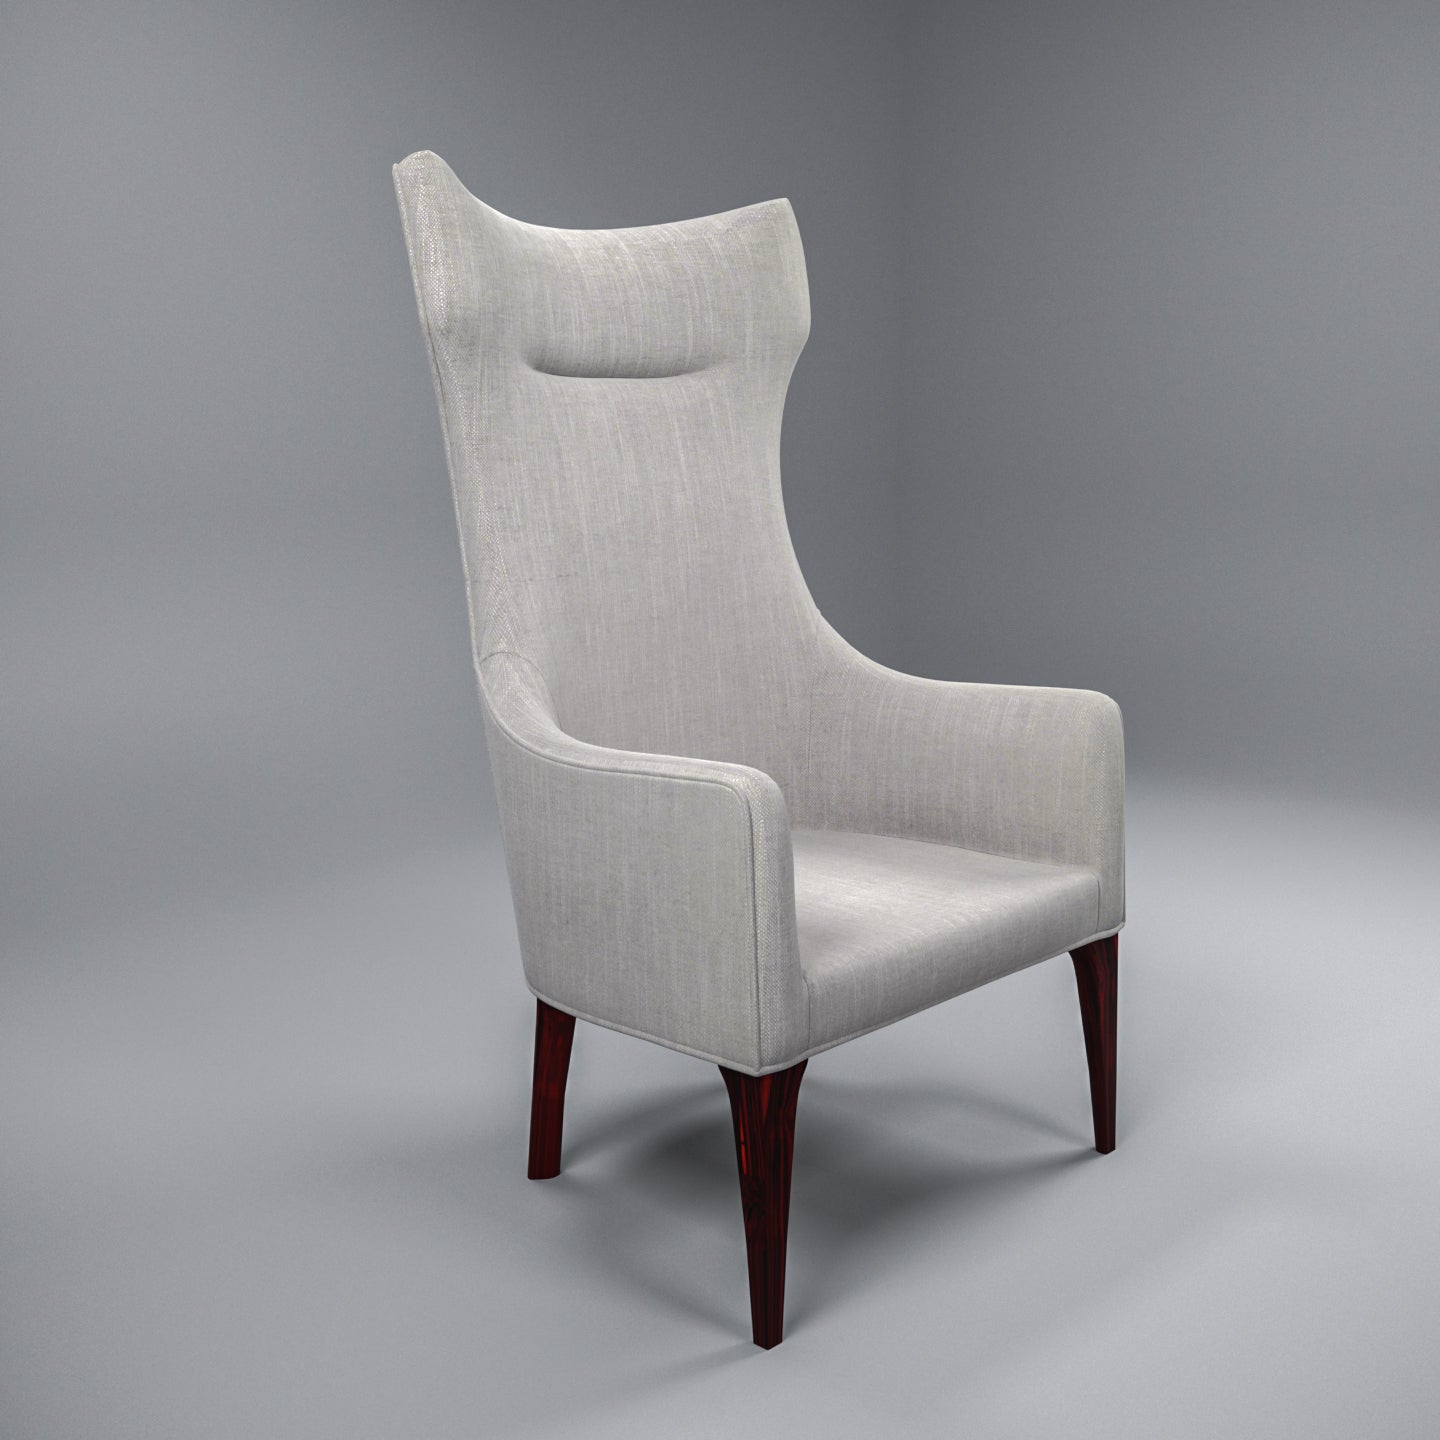 Signature White Ordinary Wooden Arm Chair Arm Chair